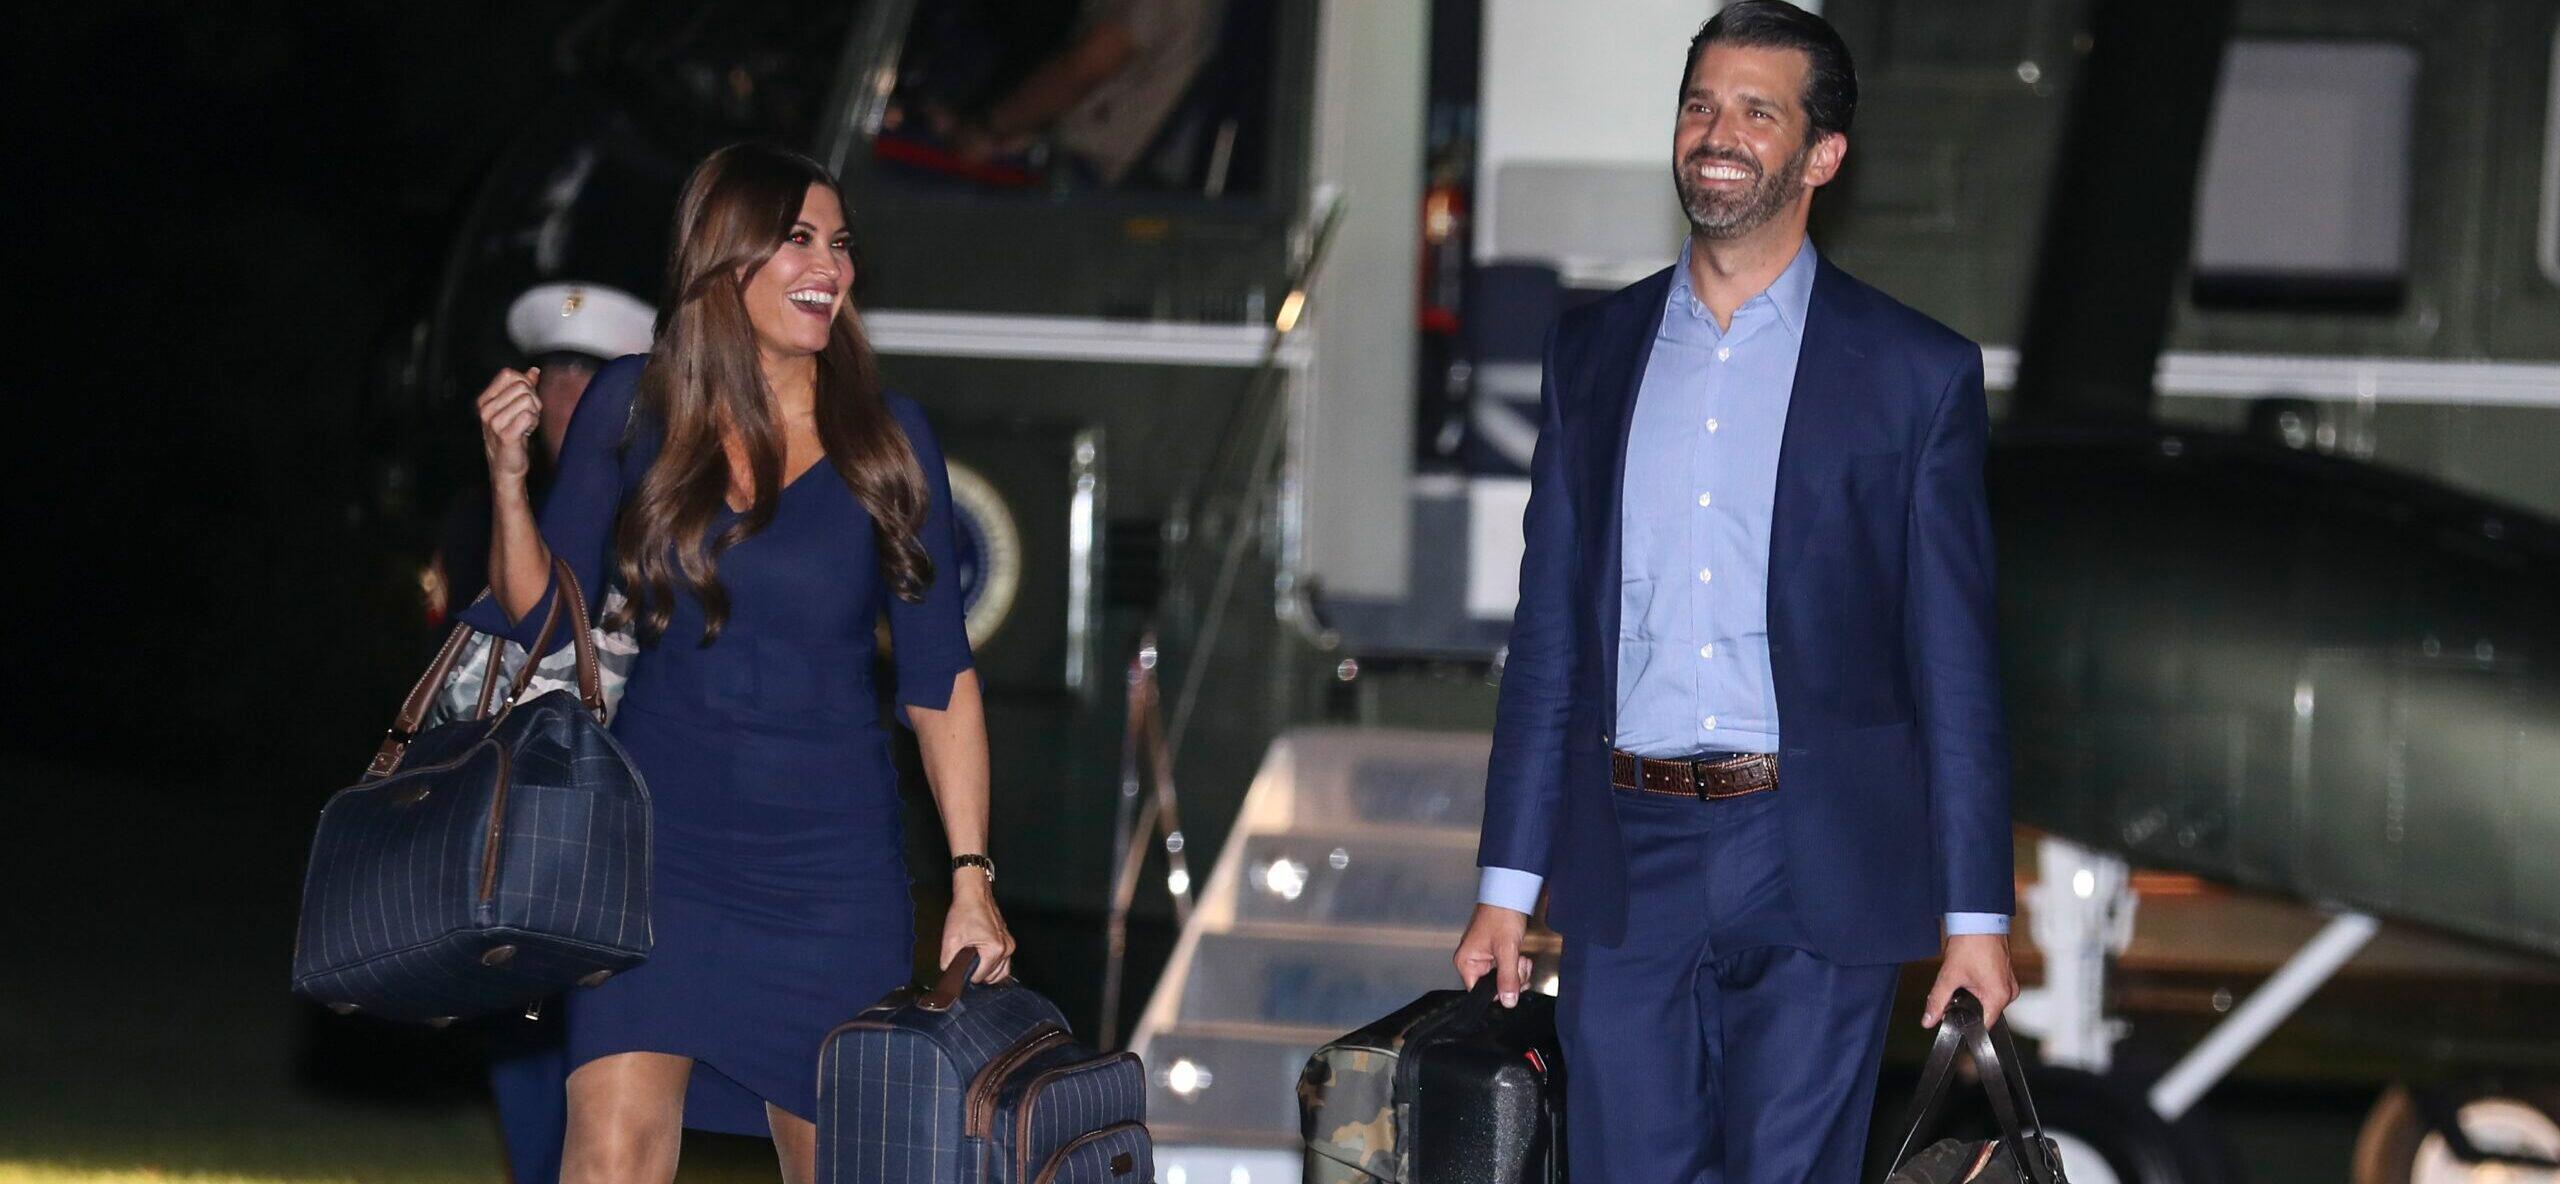 Donald Trump Jr. Secretly Engaged To Kimberly Guilfoyle For Over A YEAR!